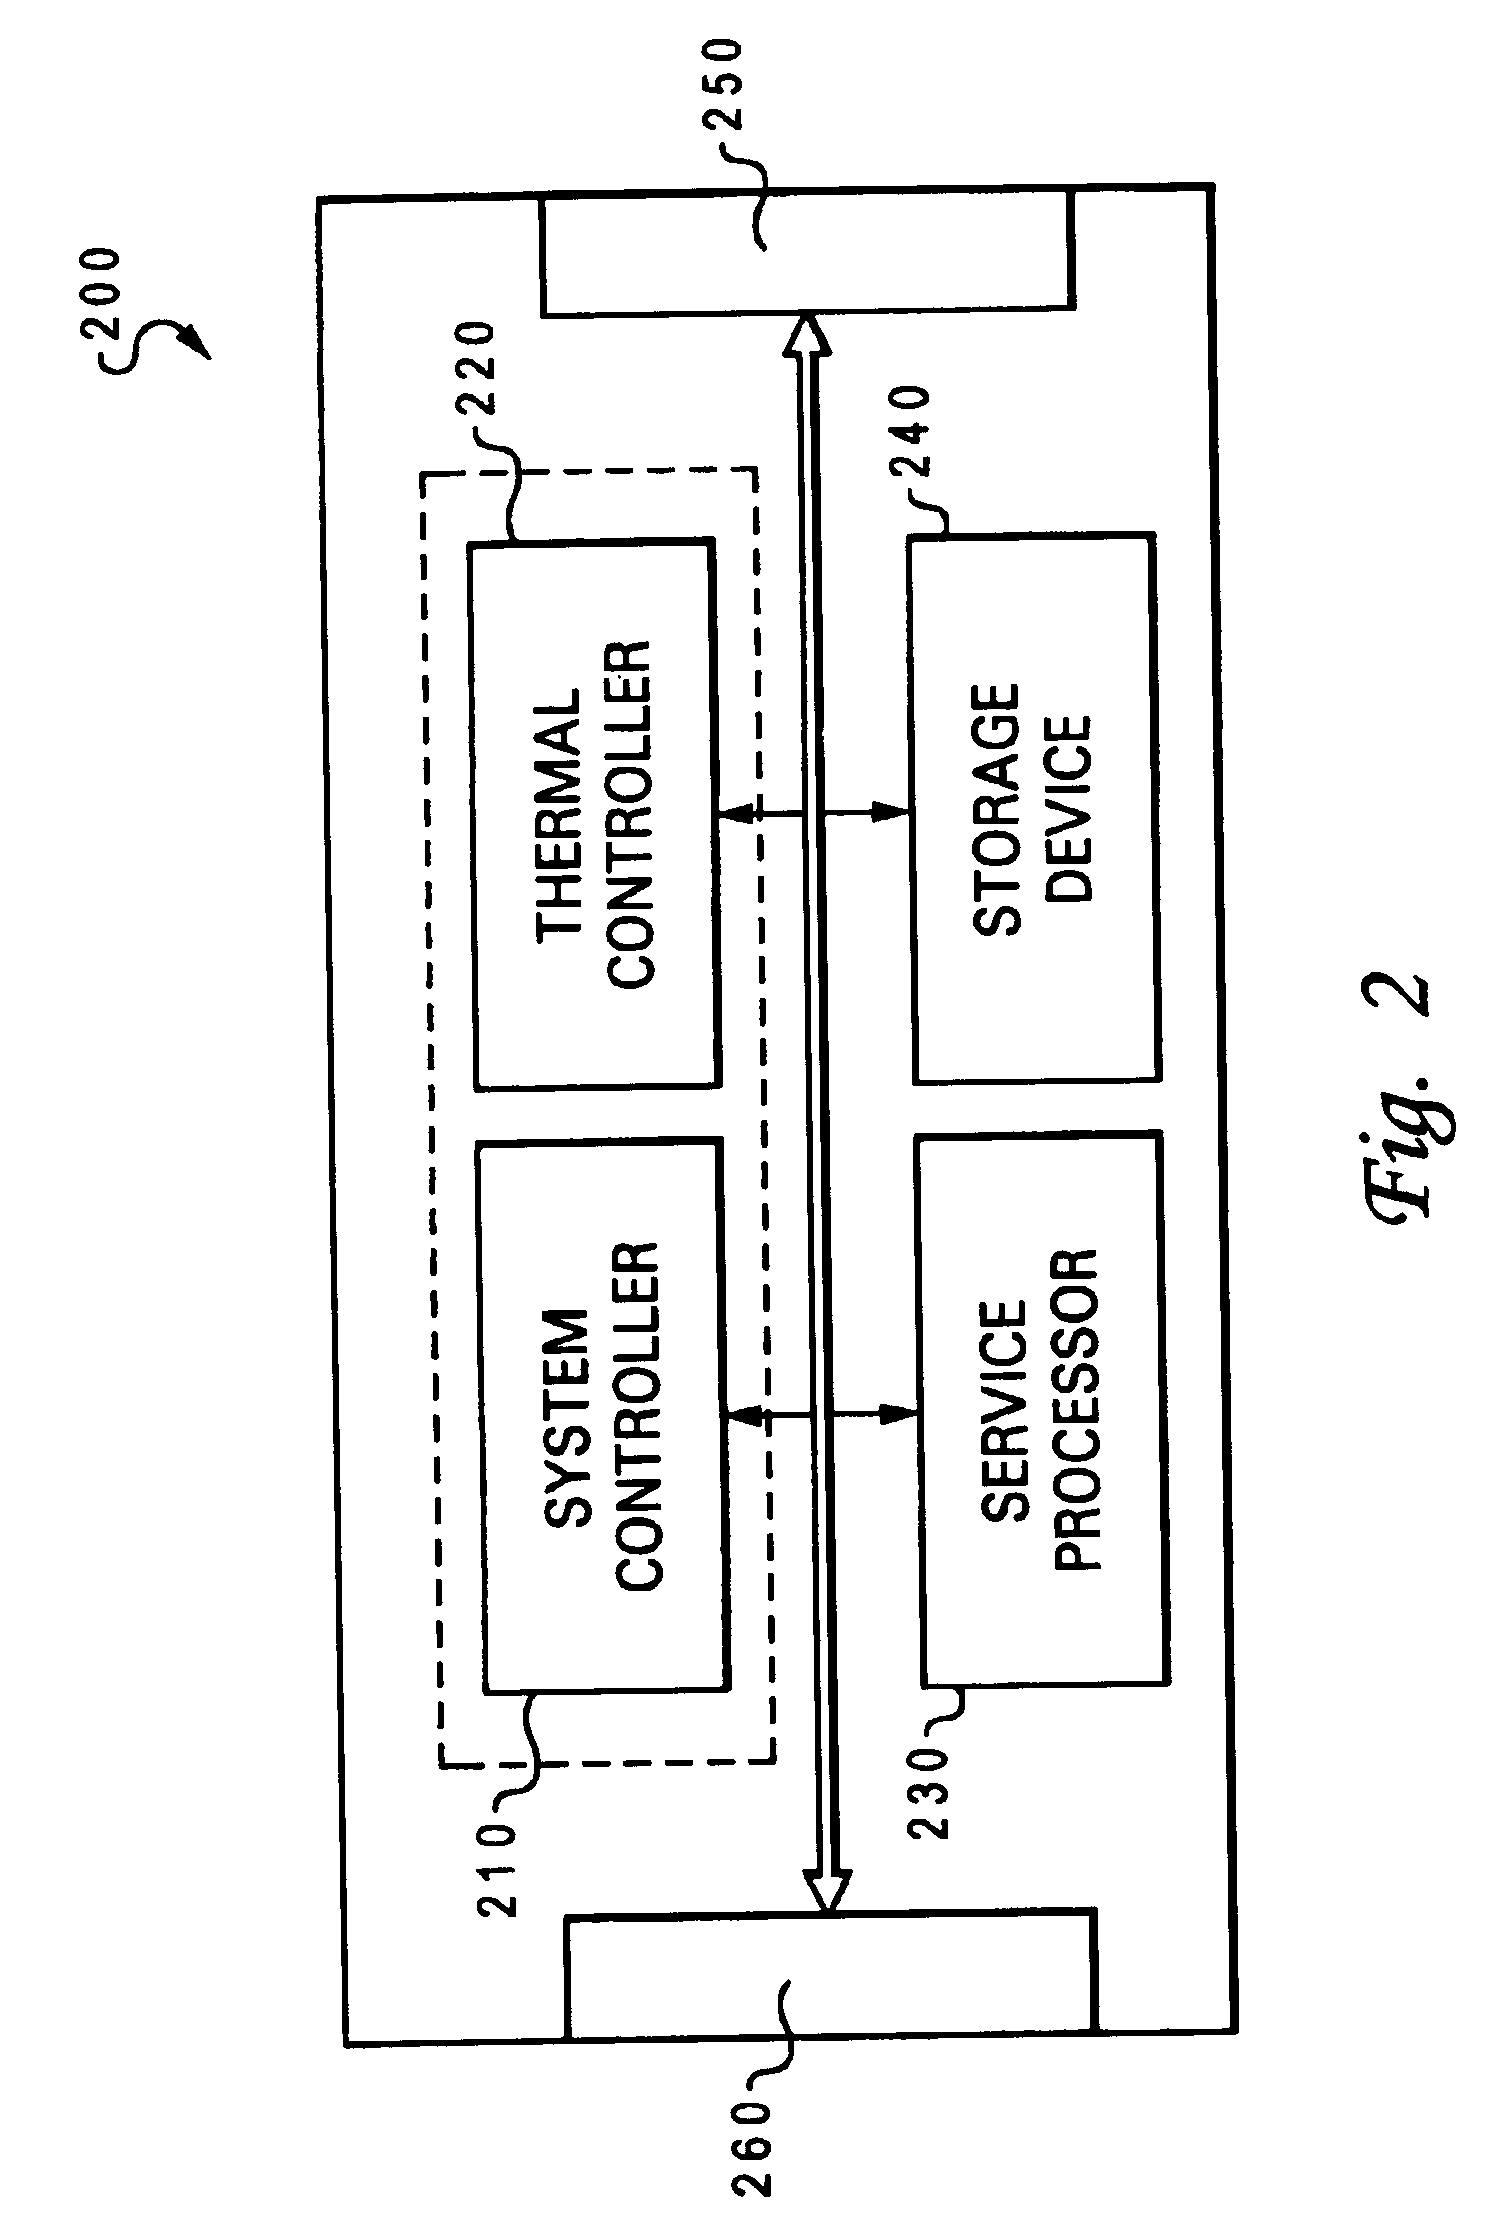 System and method for co-operative thermal management of electronic devices within a common housing